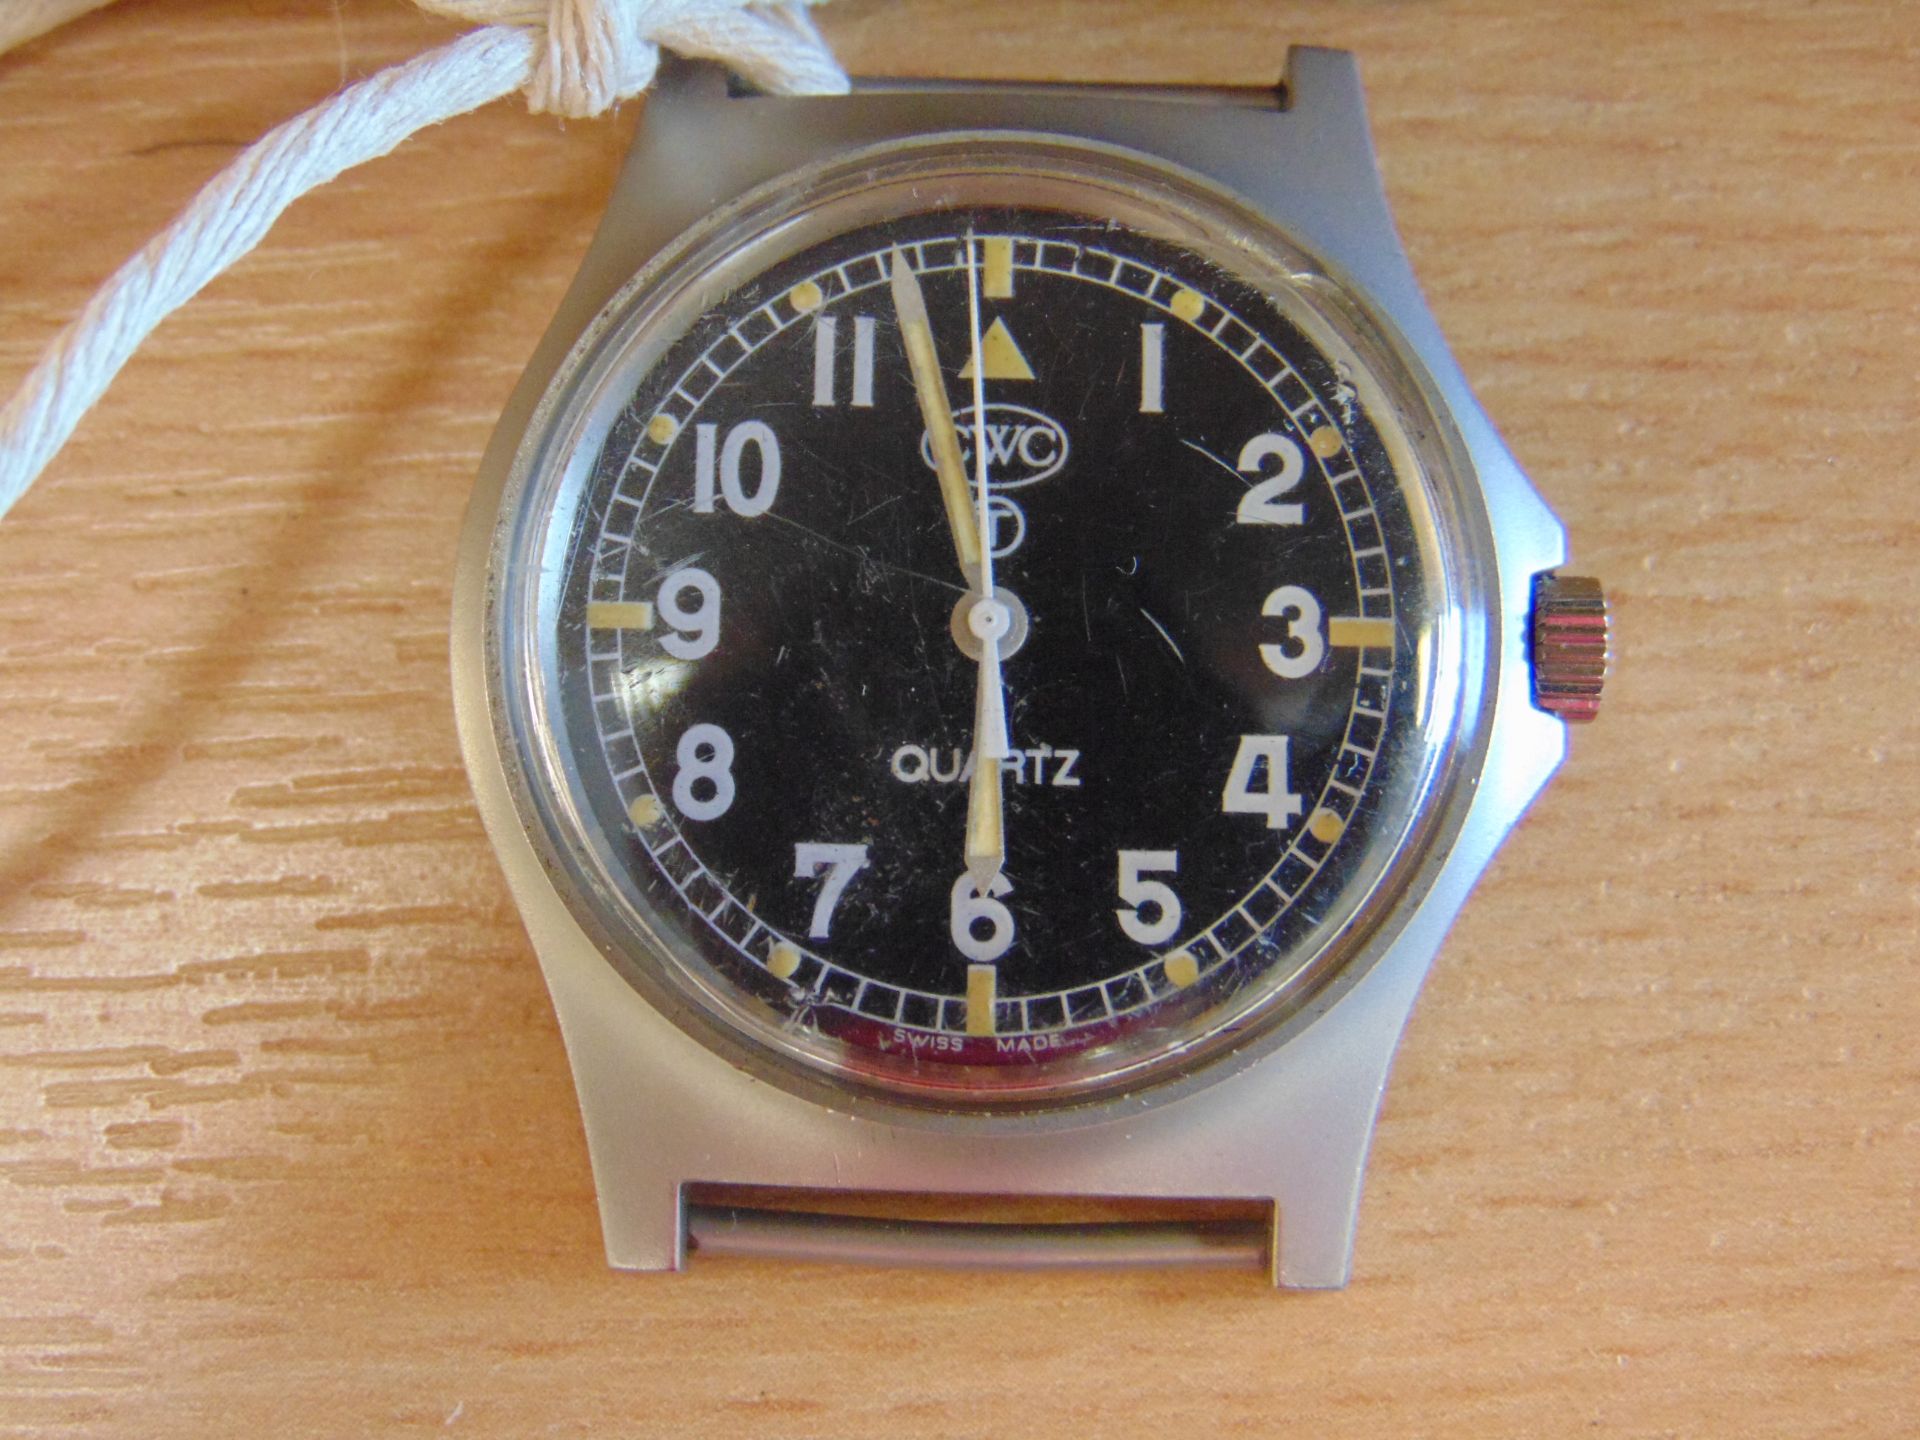 CWC W10 BRITISH ARMY SERVICE WATCH NATO MARKS DATE 2006 WATER RESISTANT TO 5 ATM - Image 2 of 5